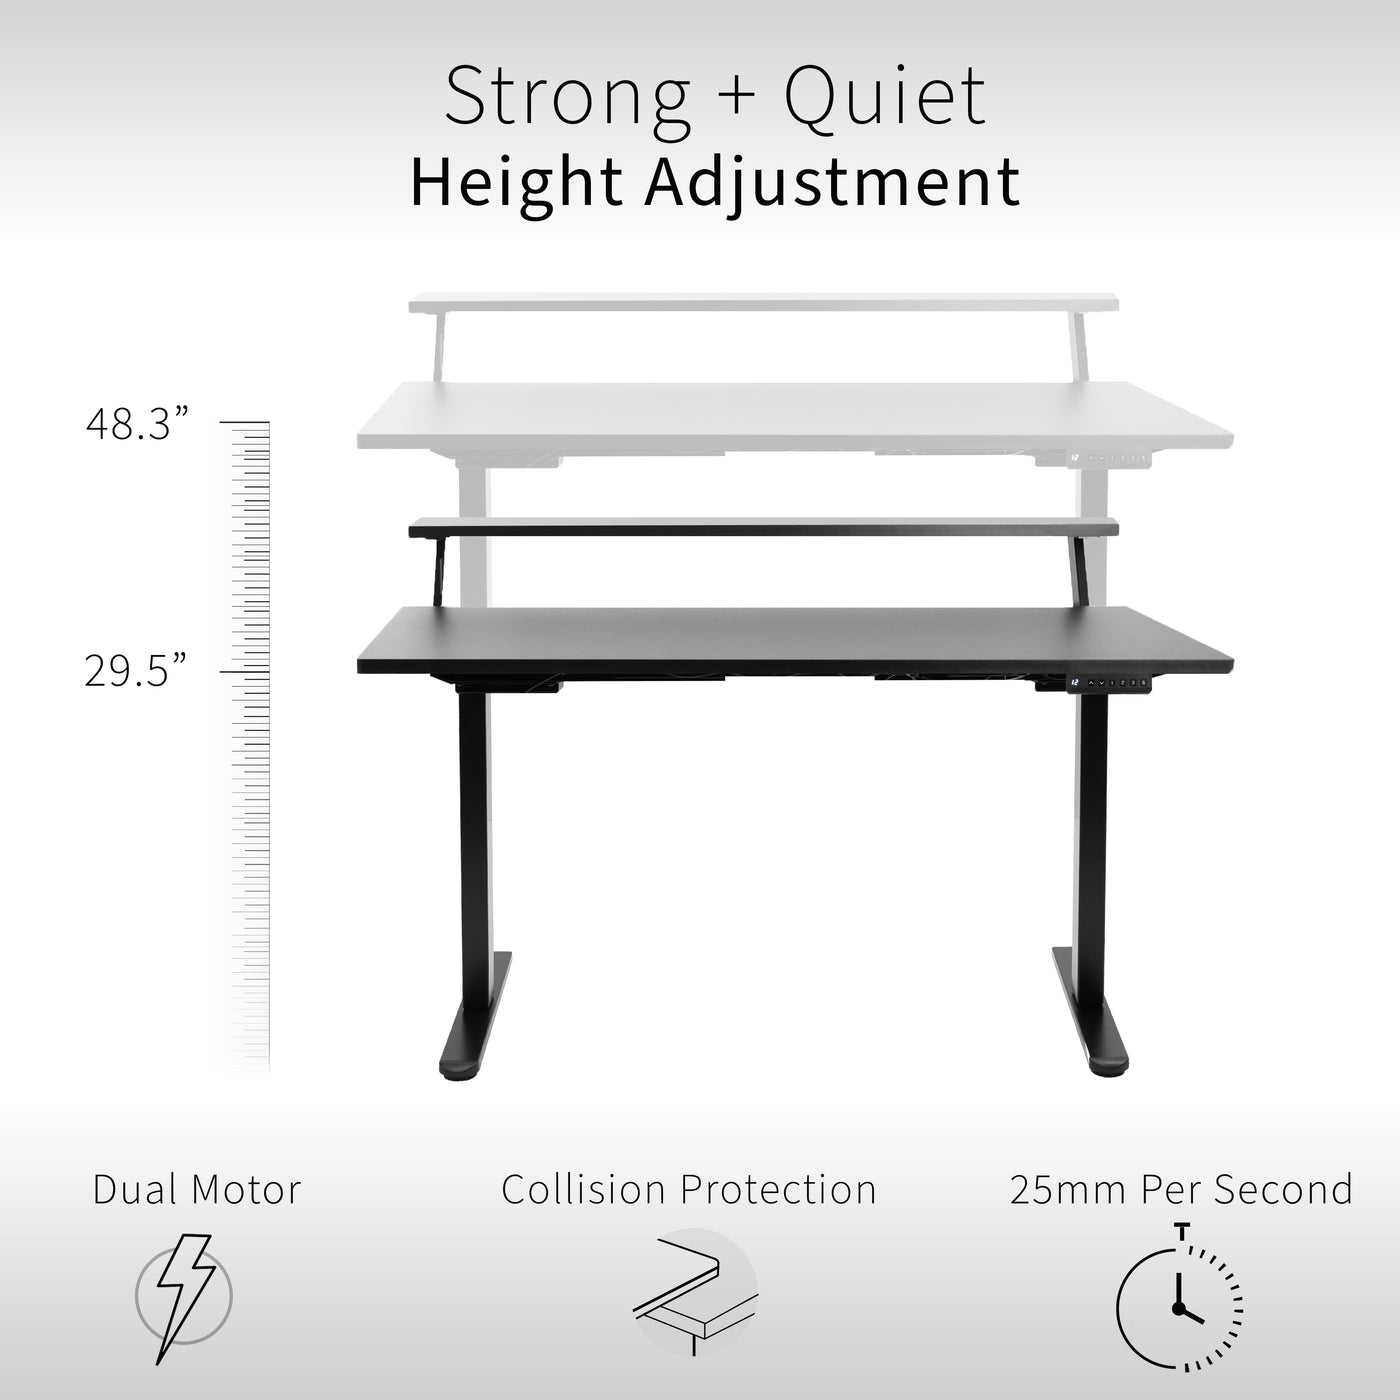 Heavy-duty dual tier electric height adjustable ergonomic desk workstation with programmable memory controller.